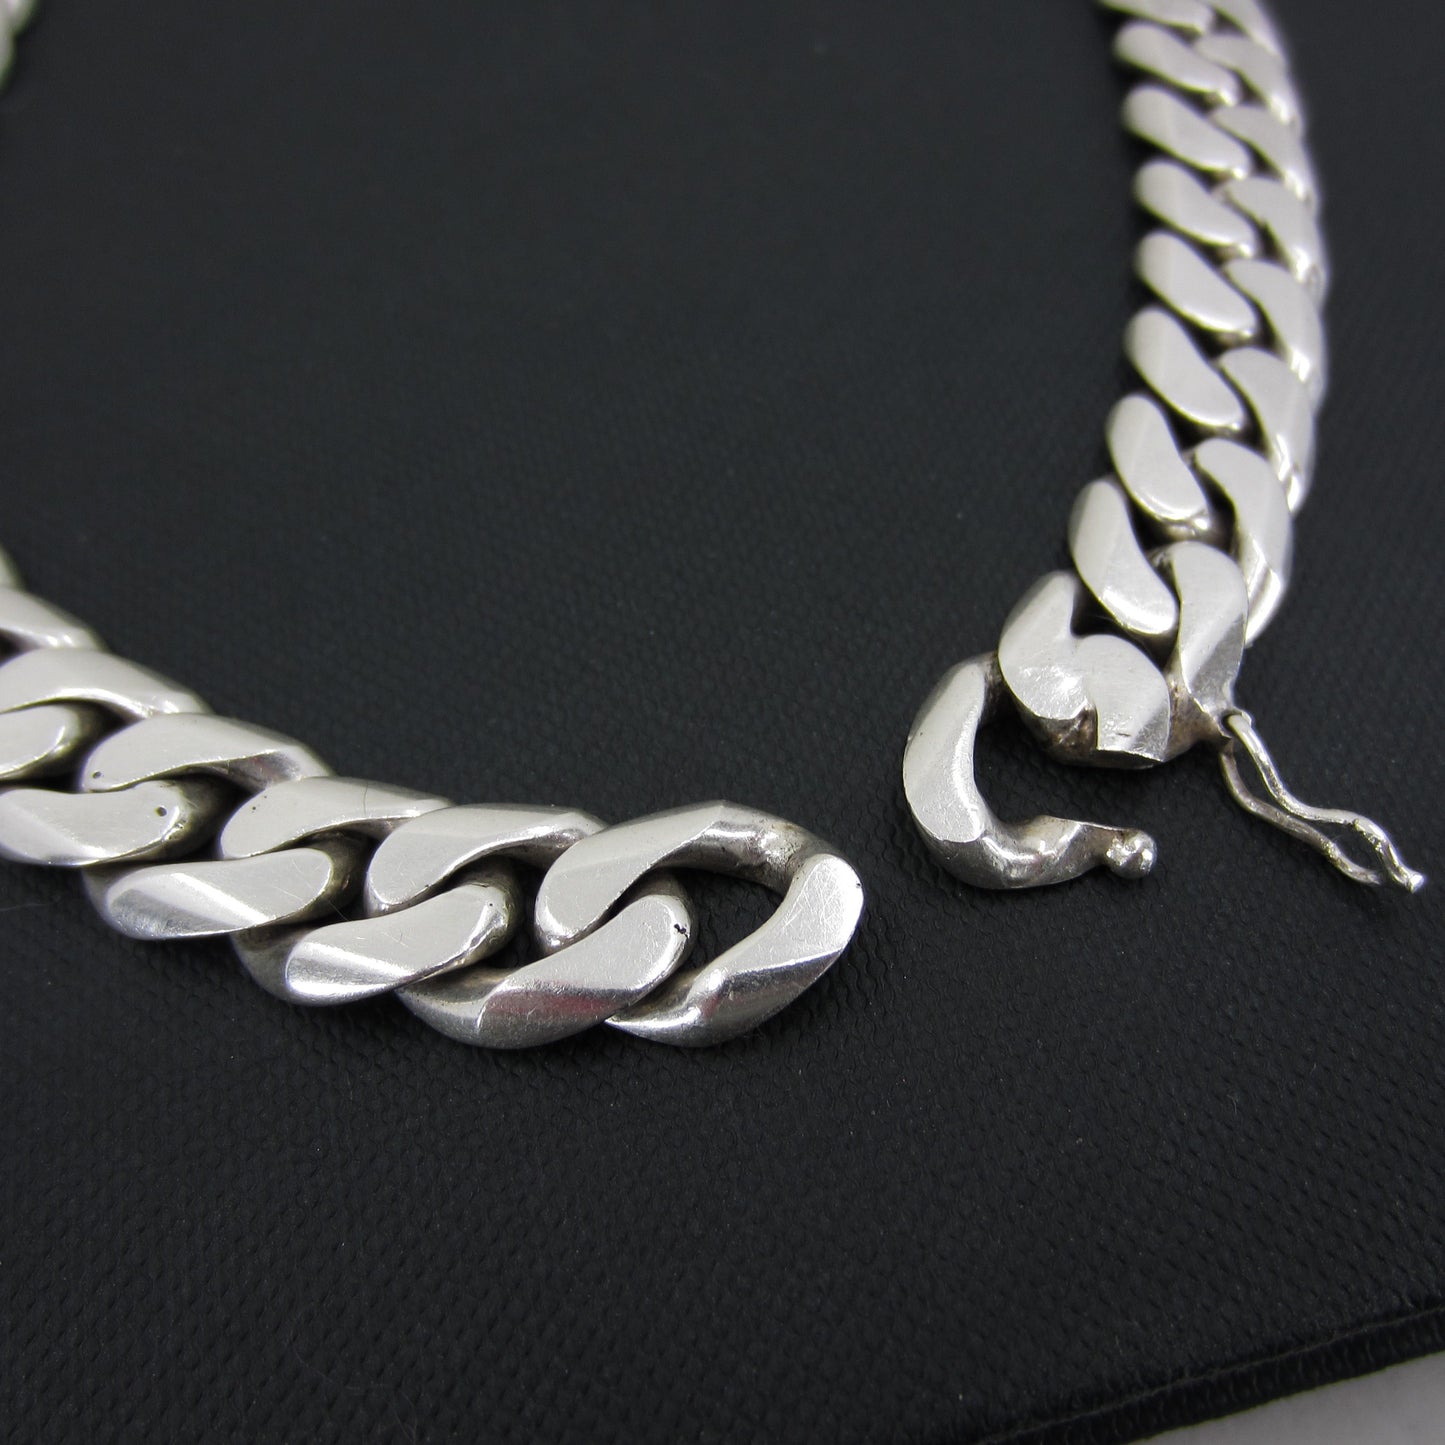 SOLD--Vintage Heavy Flat Curb Link Chain Sterling, Italy c. 1980